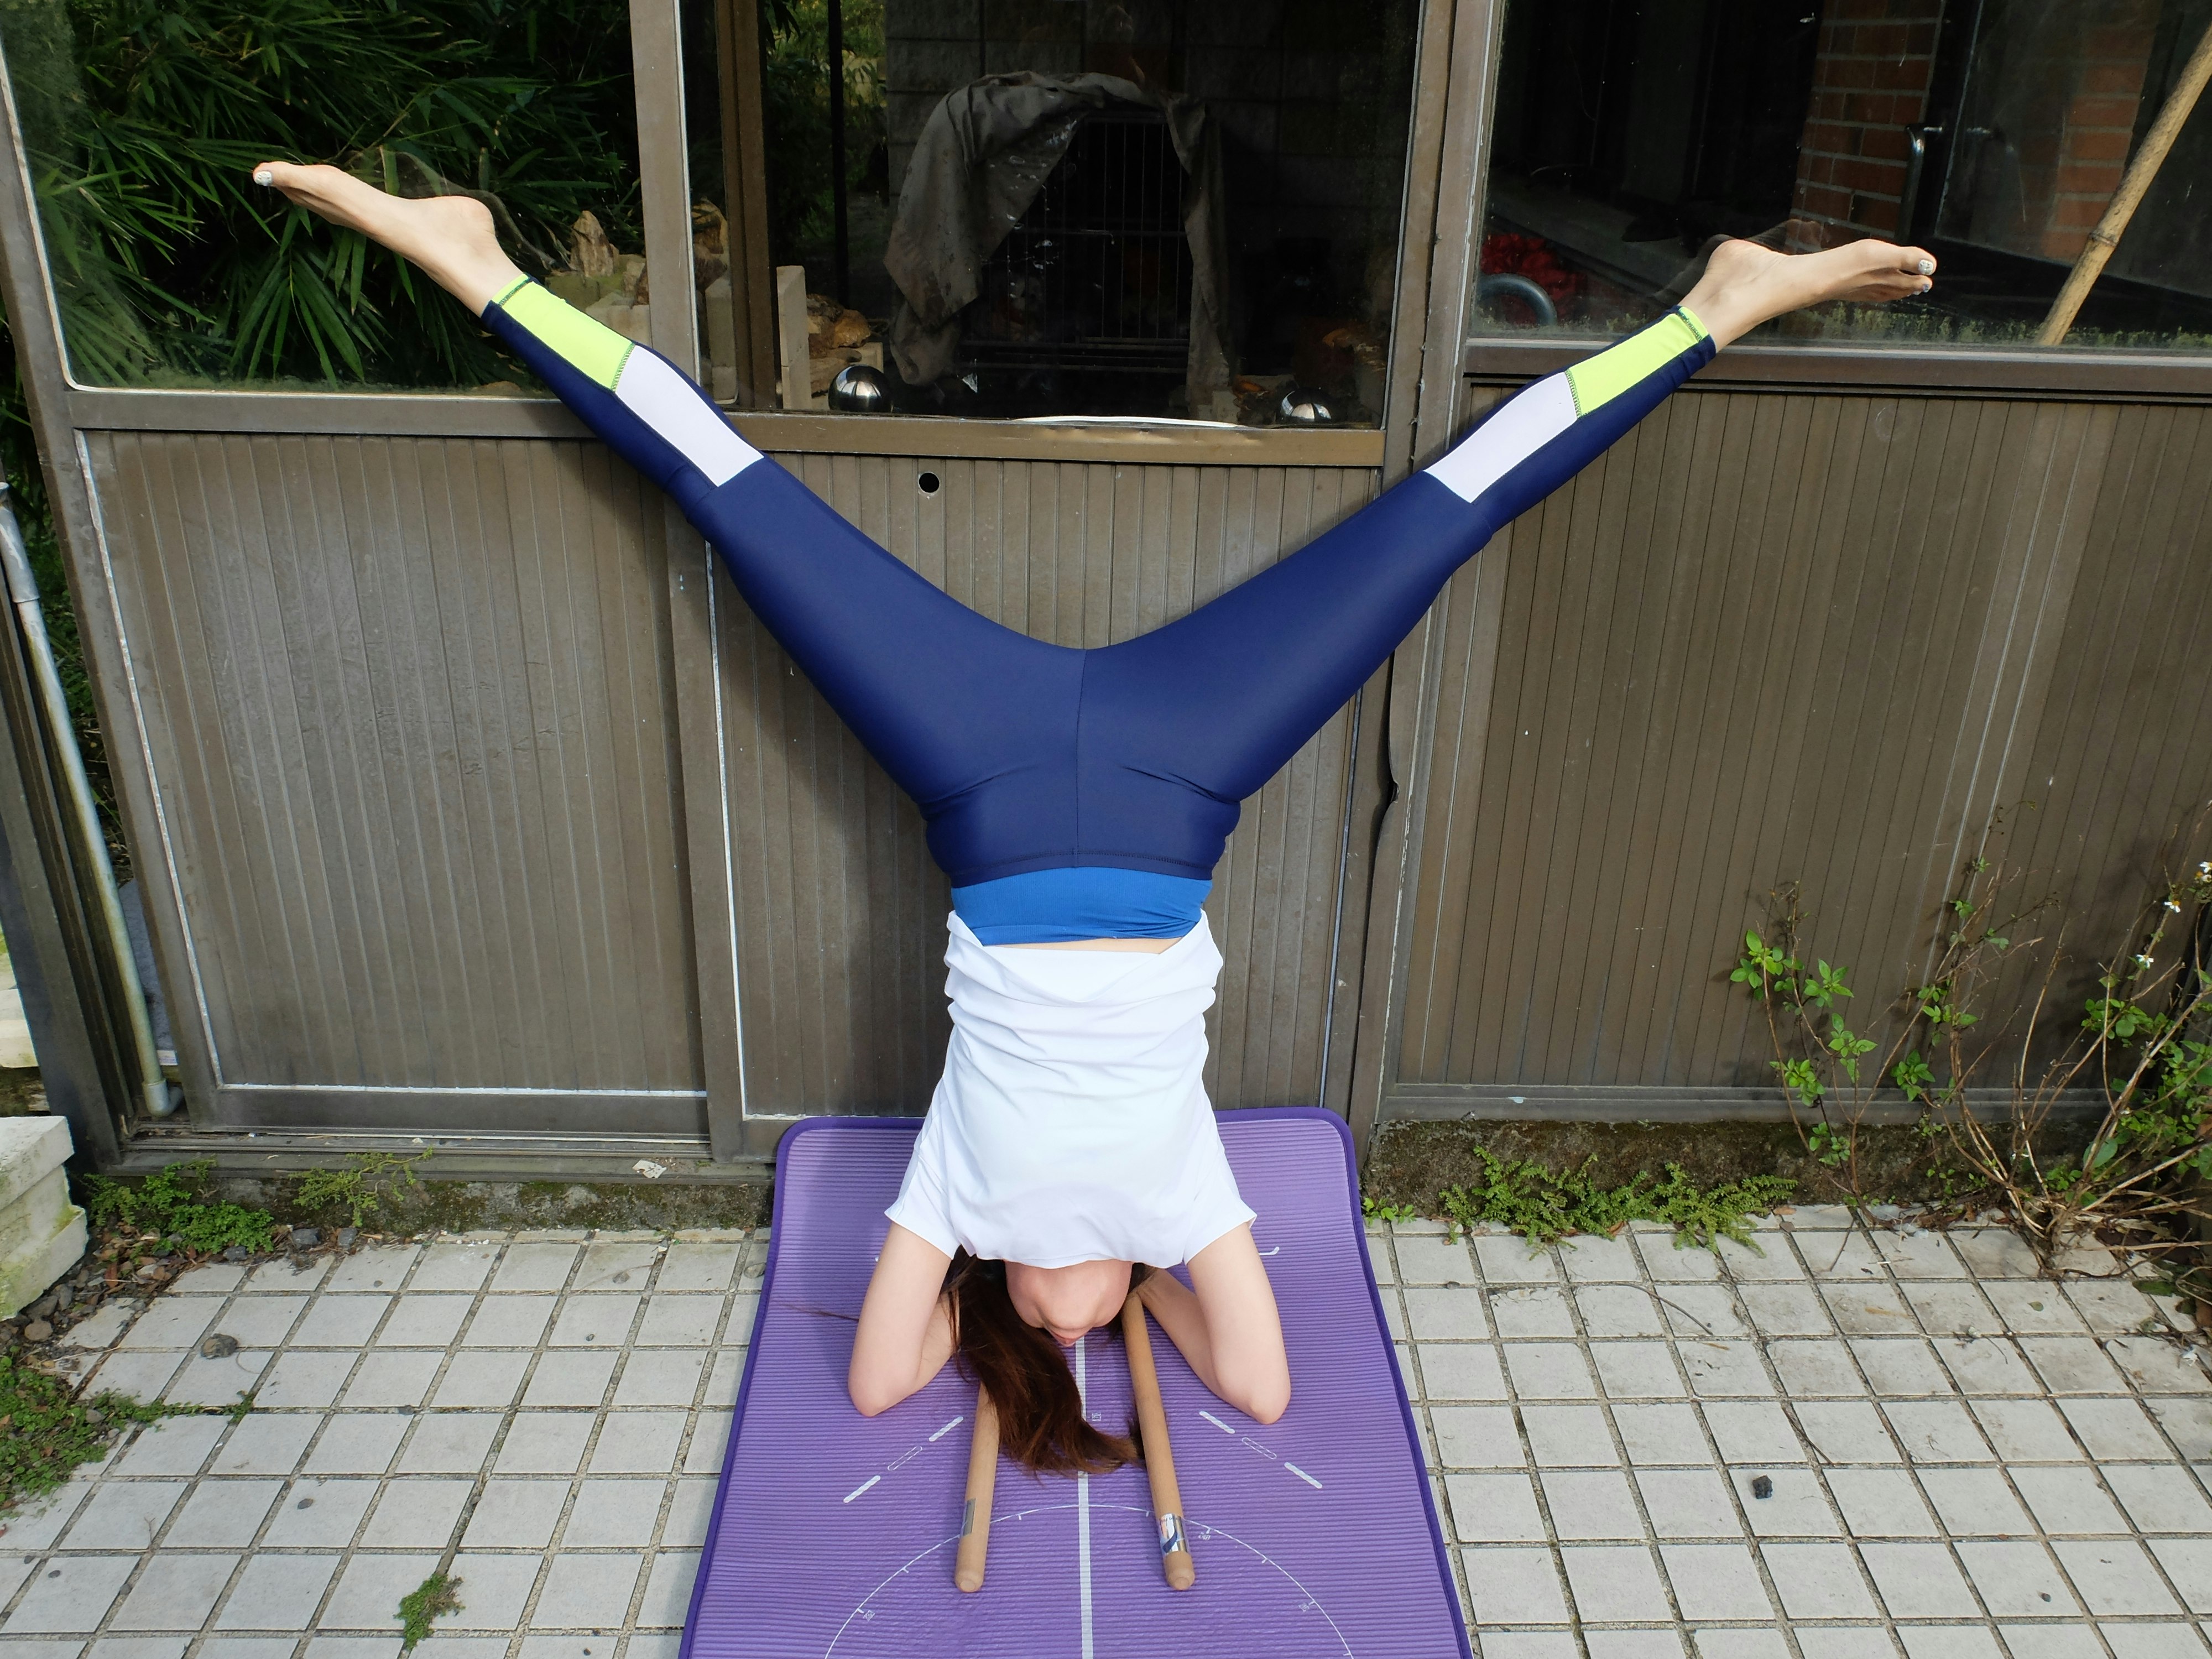 Hsiao Mei-Fang performs an acrobatic headstand on a purple mat, before beginning the massage.